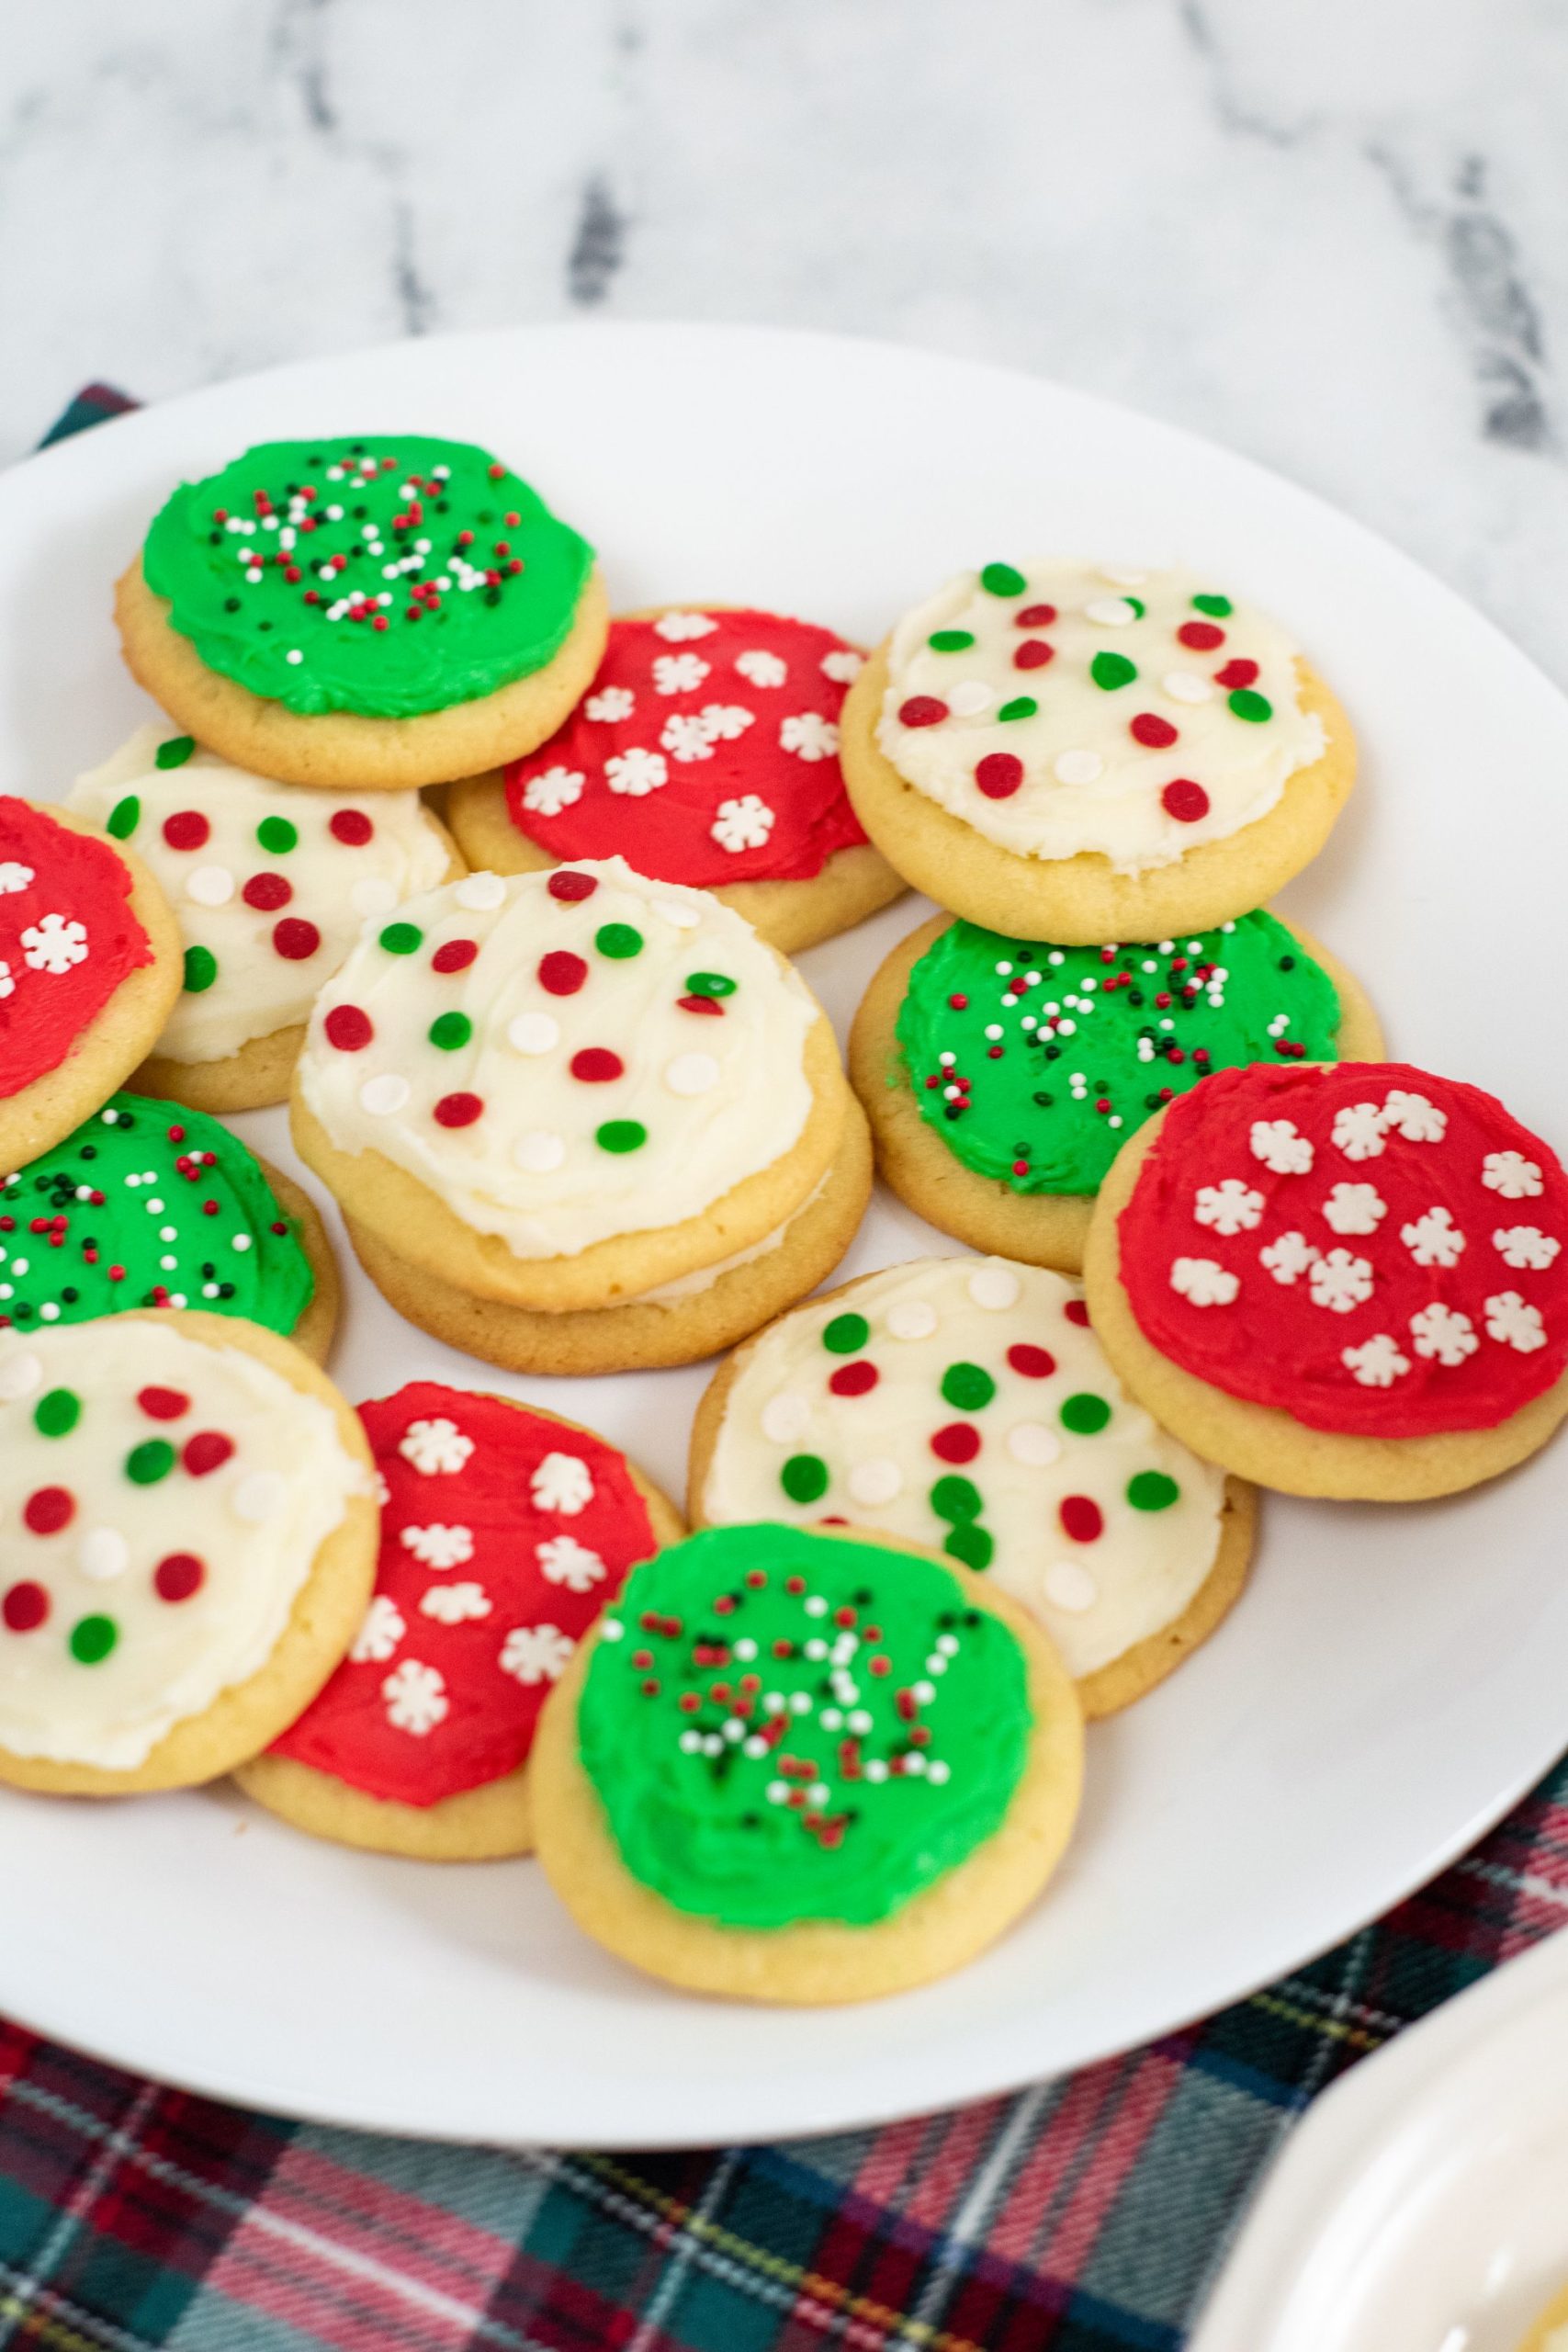 Soft cookies with icing on a white plate